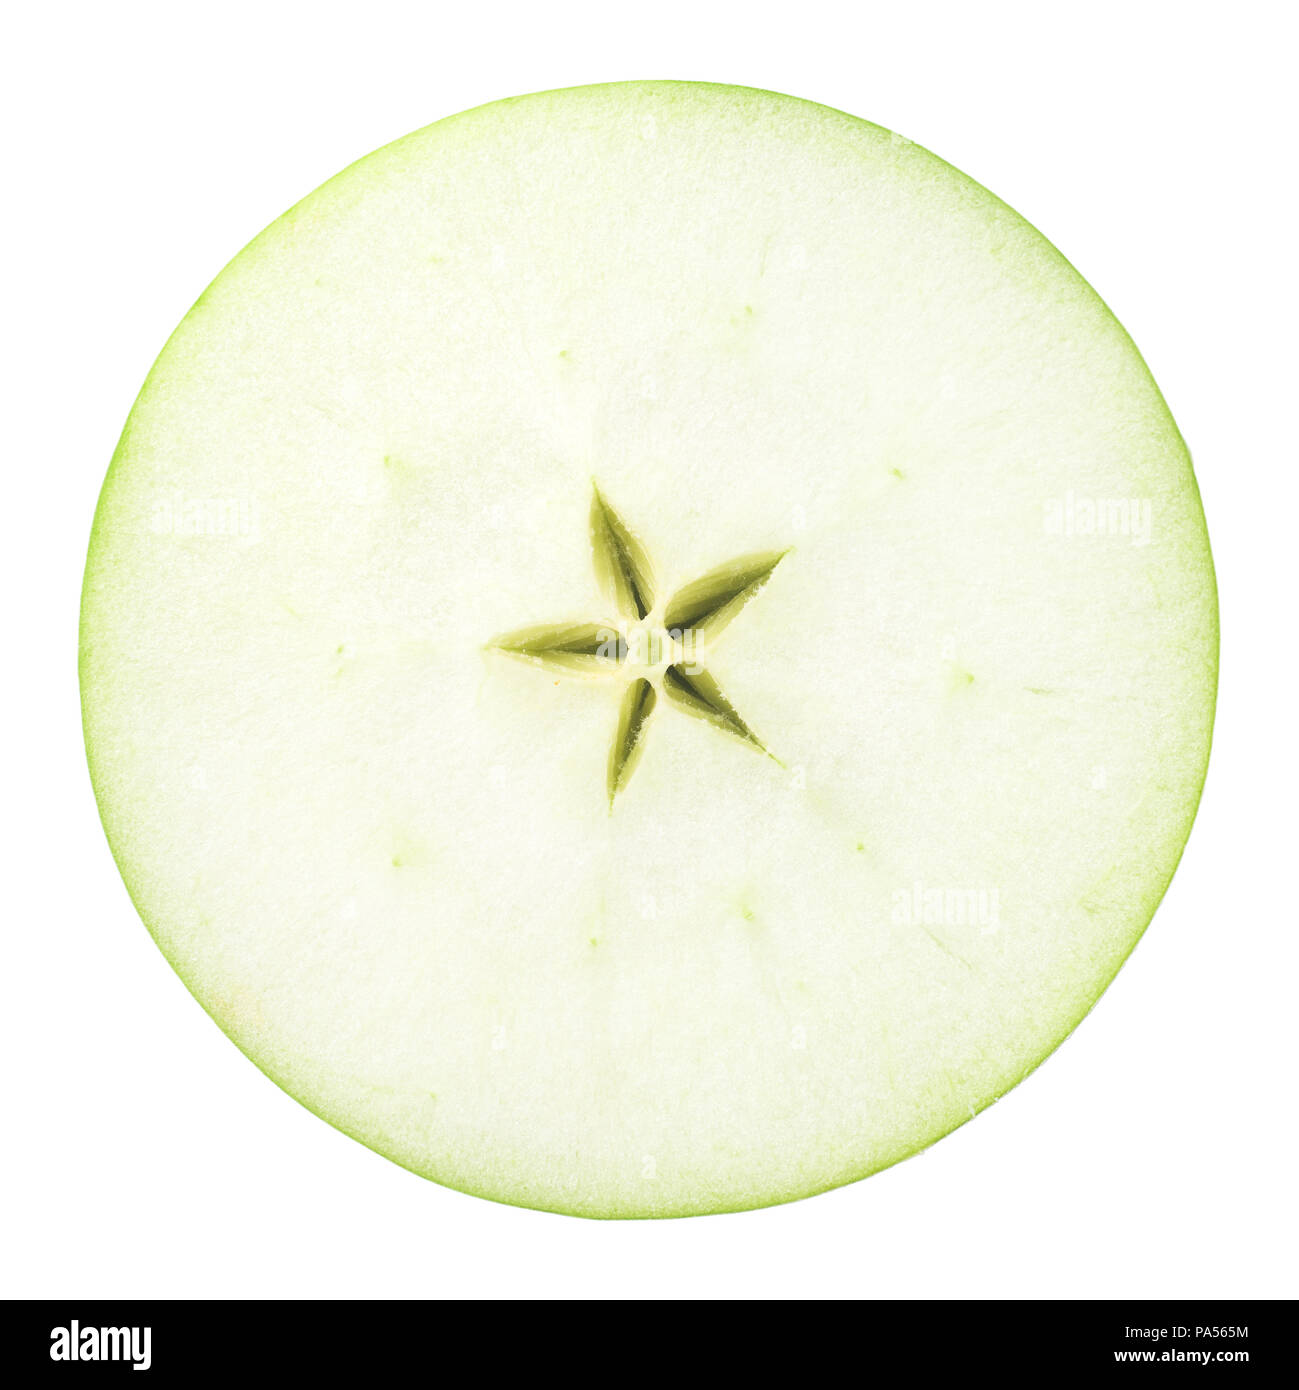 the cut apple in half, in the middle a seed, separately on a whi Stock Photo